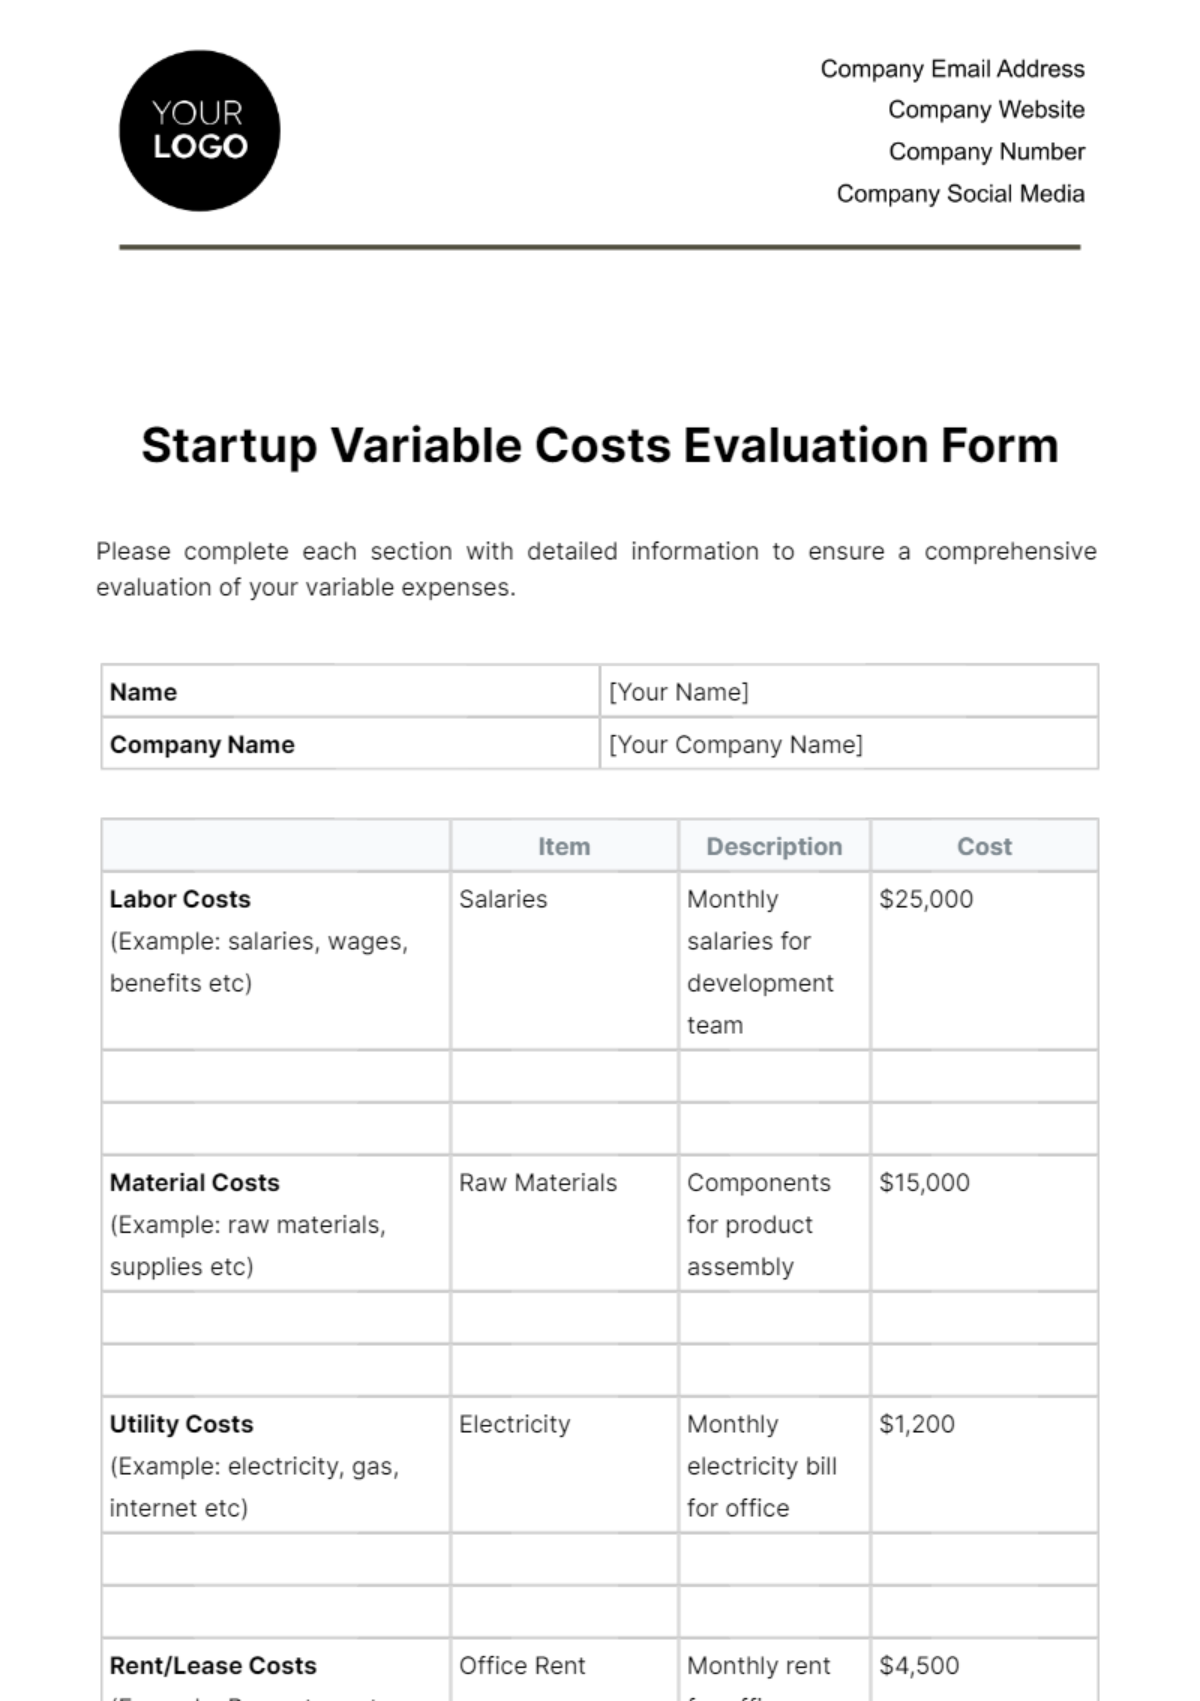 Free Startup Variable Costs Evaluation Form Template